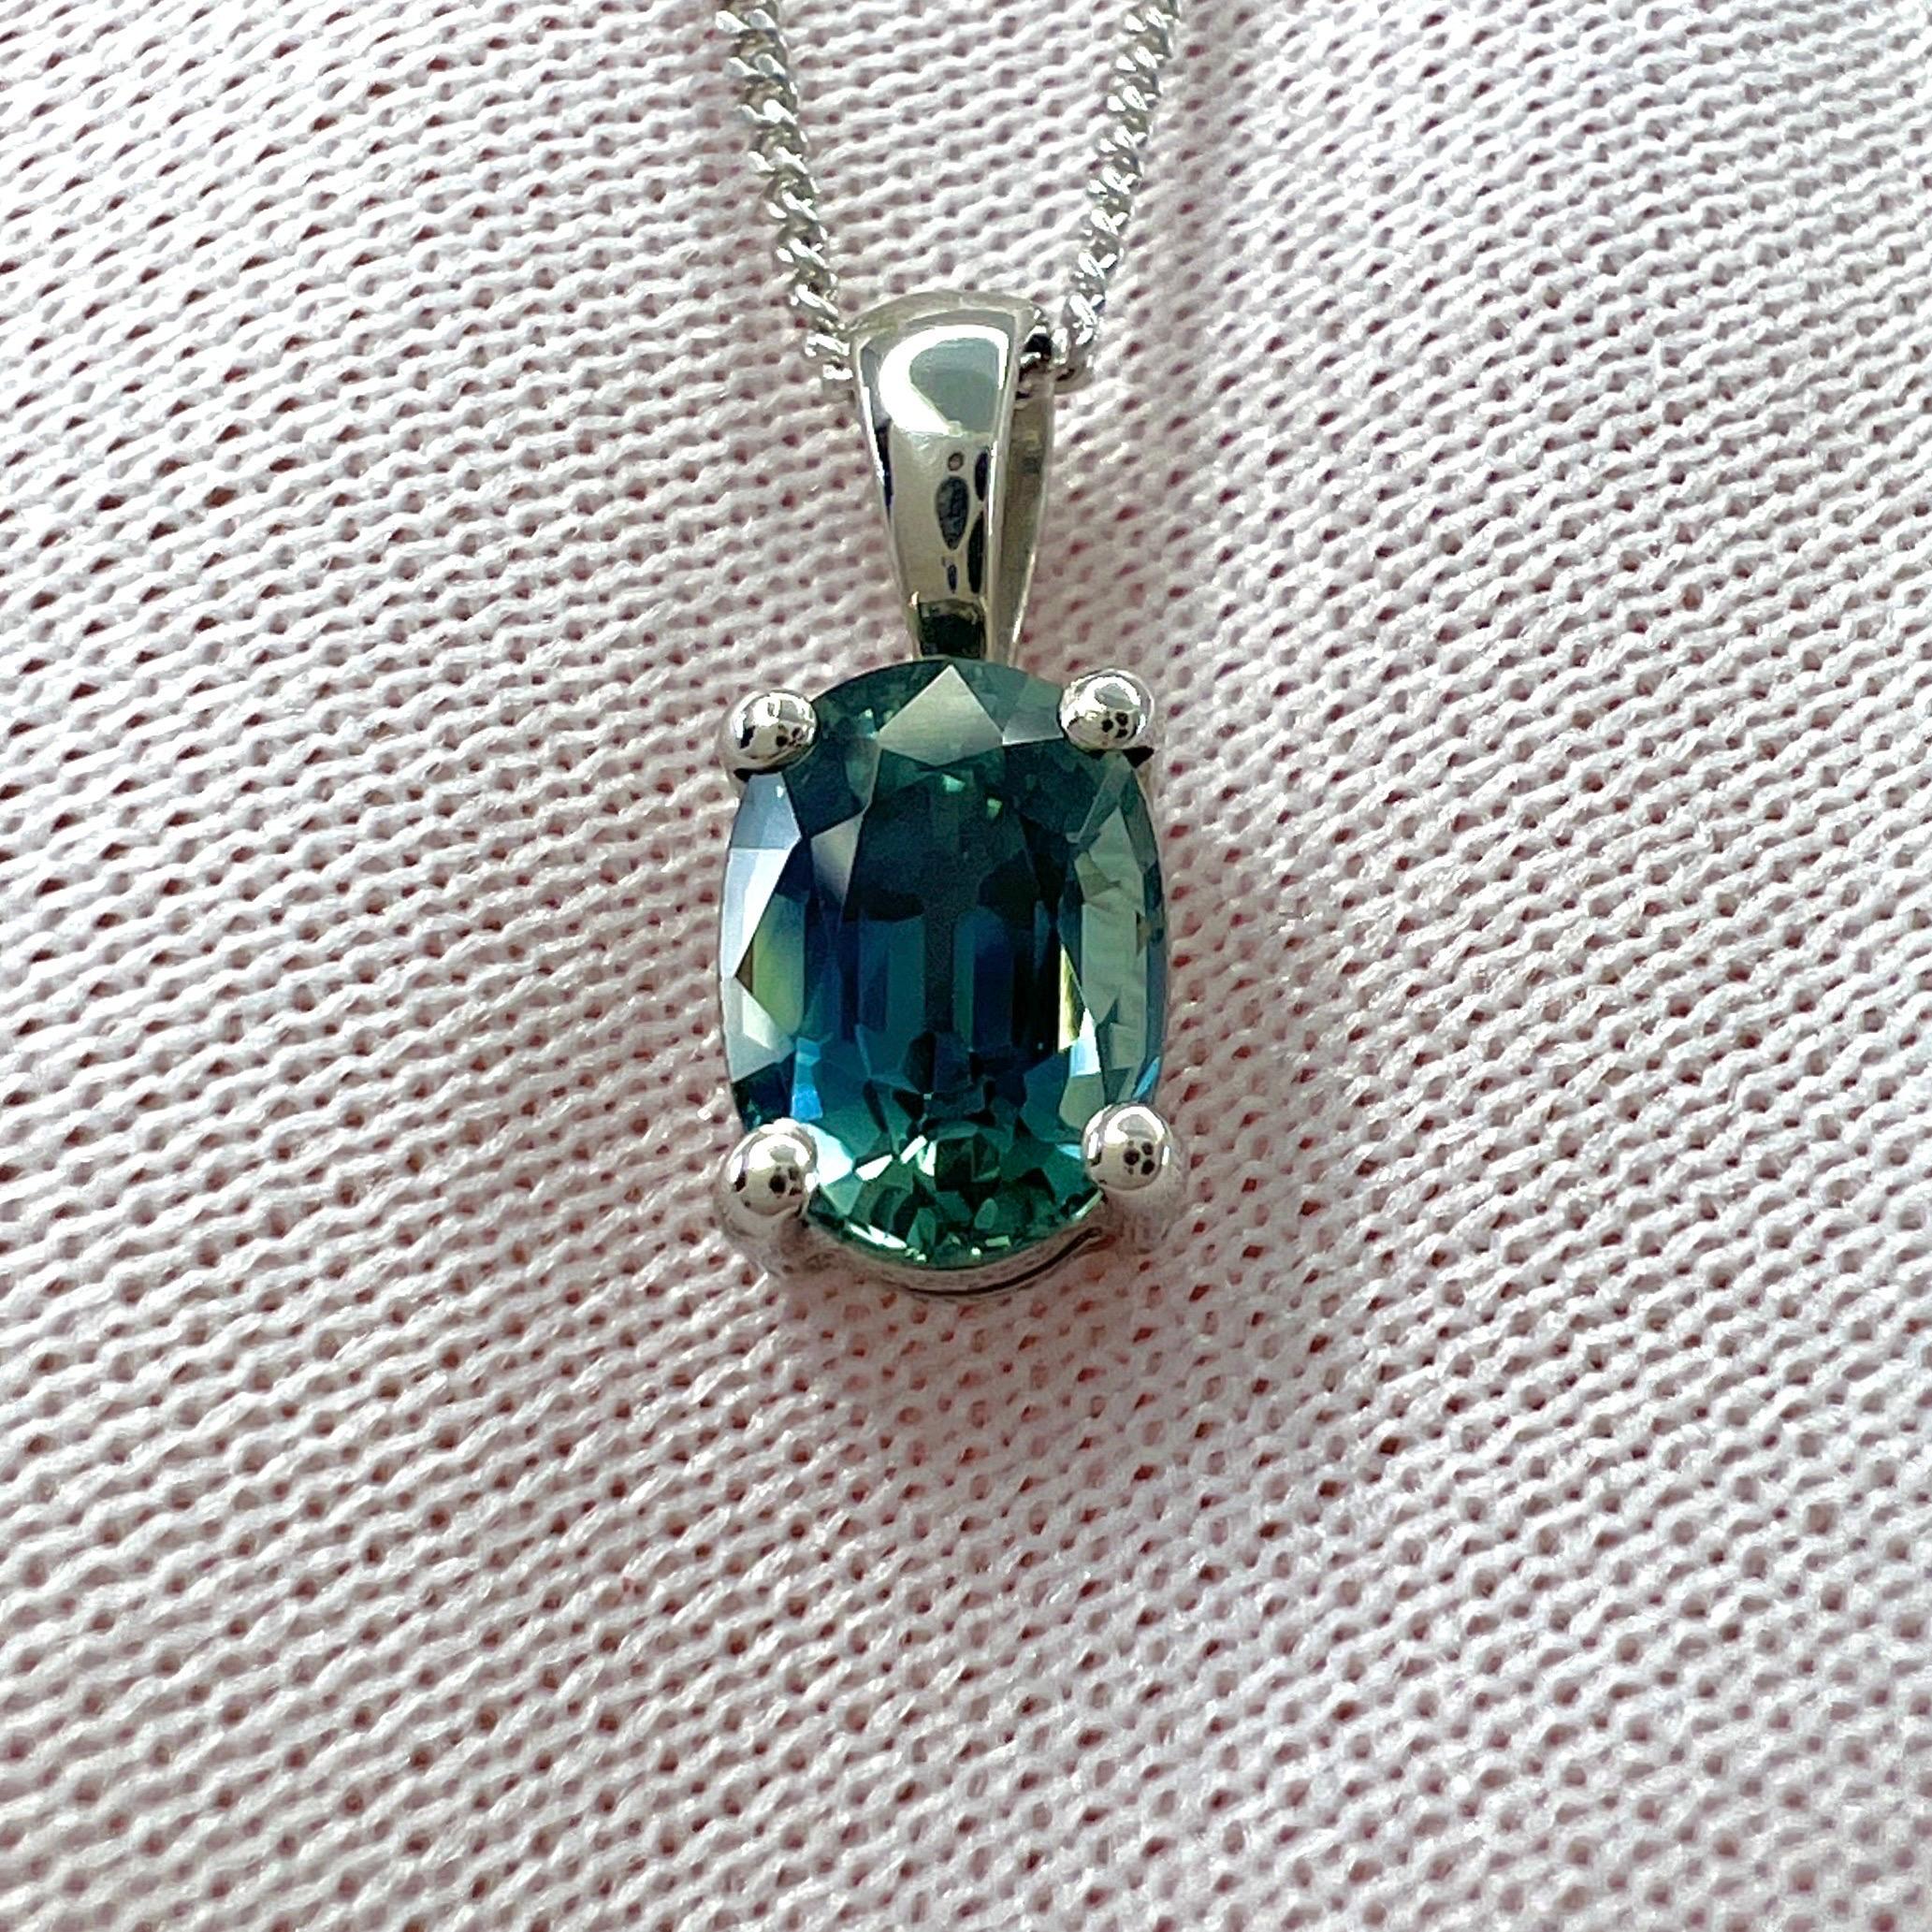 Natural Deep Teal Blue Green Sapphire Platinum Oval Cut Pendant Necklace.

1.37 Carat sapphire with a beautiful deep blue green 'teal' colour and excellent clarity, a very clean stone. VVS.

Also has an excellent oval cut, set in a fine 950 platinum